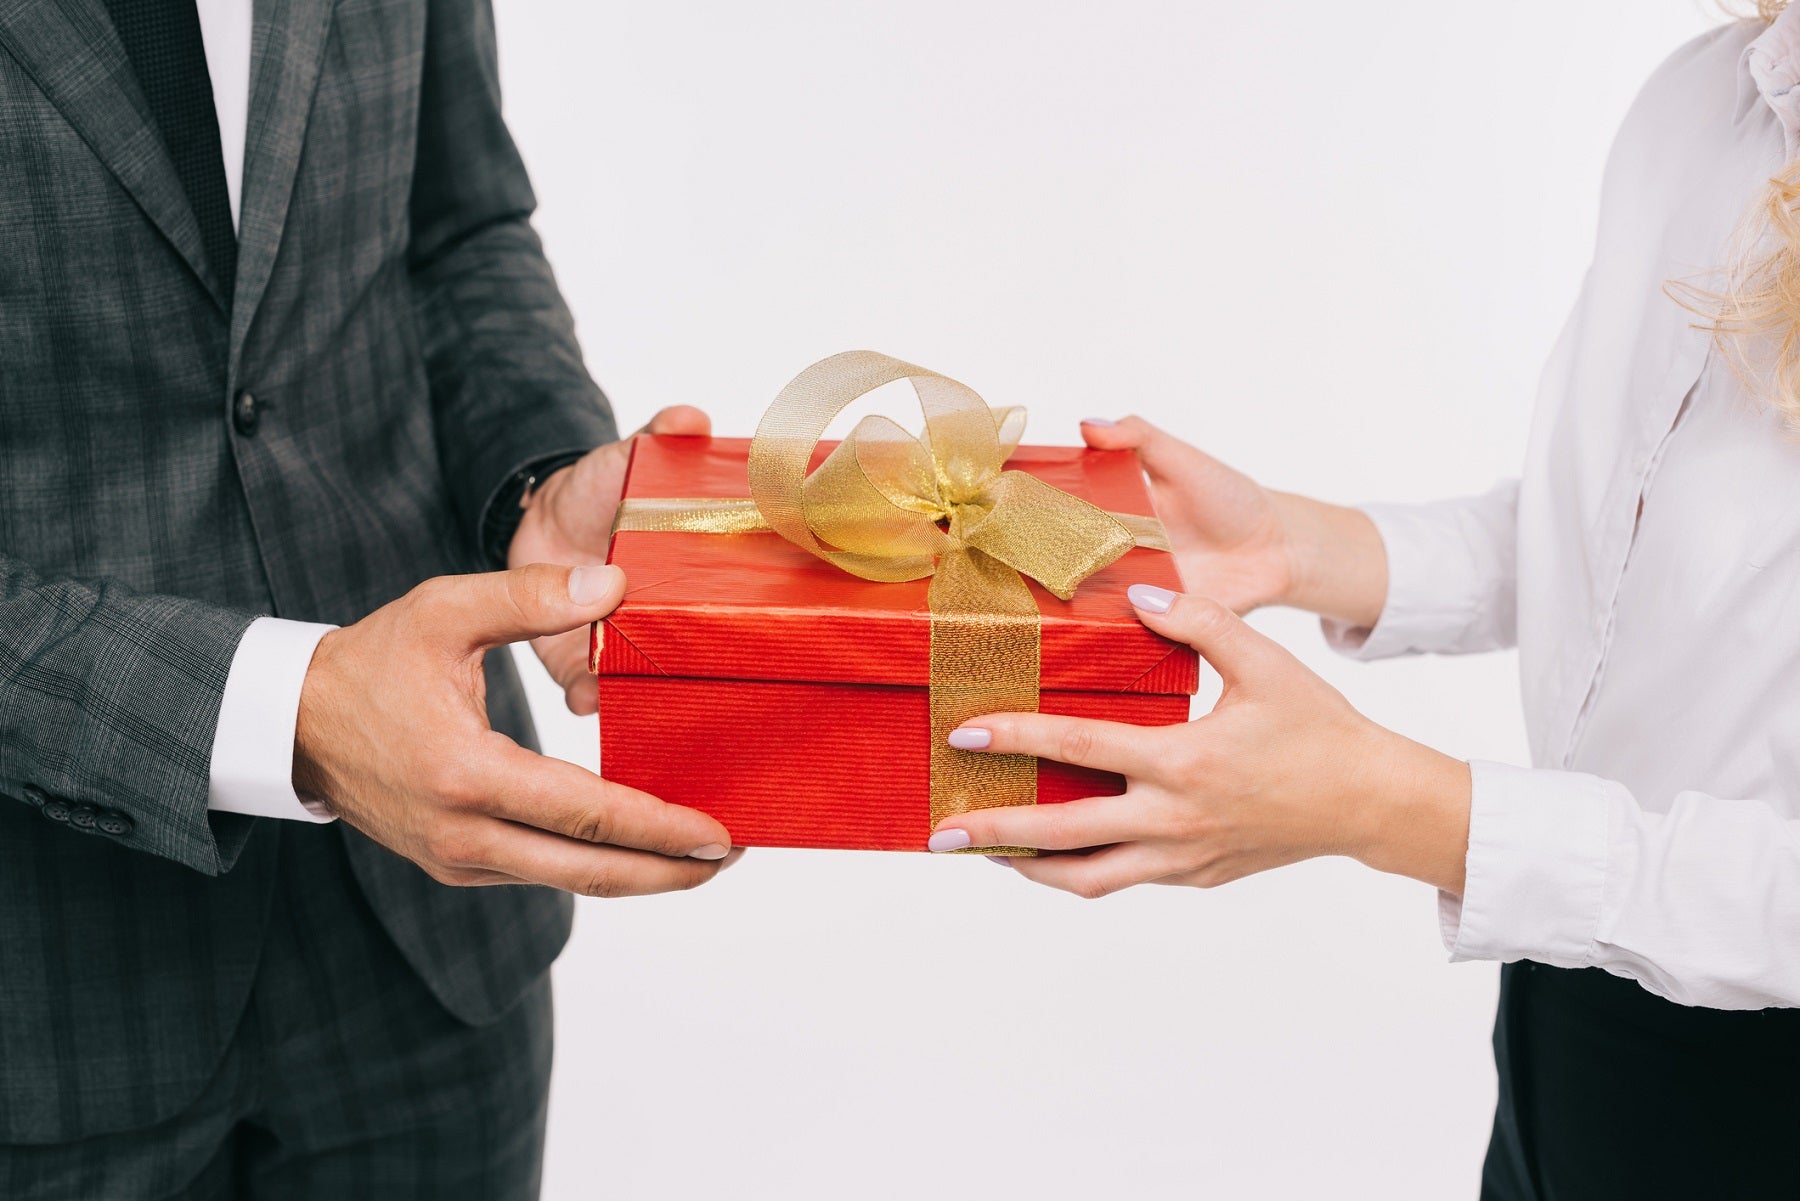 Gifts and Entertainment within the Financial Services industry